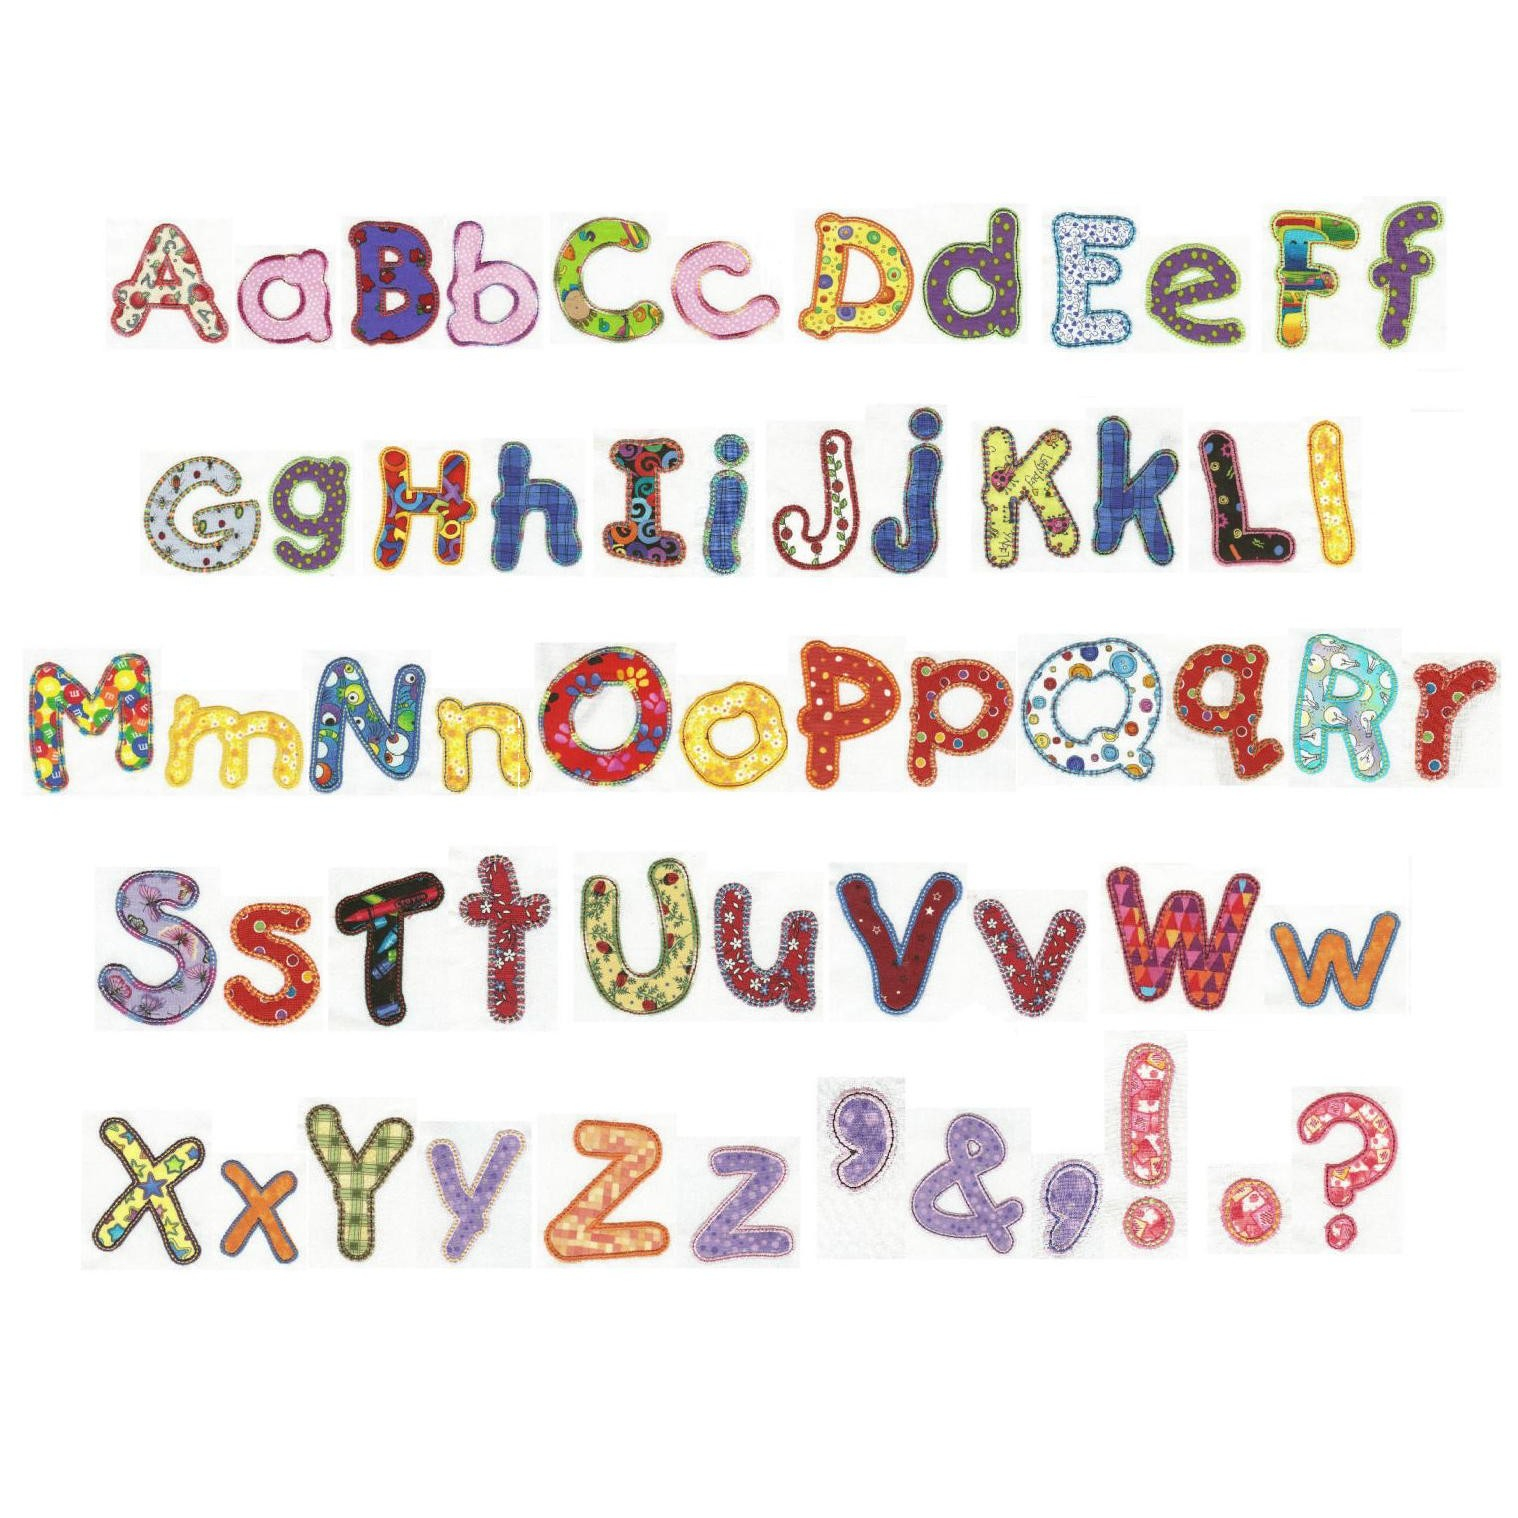 Free Embroidery Alphabet Patterns 14 Machine Embroidery Designs Applique Alphabet Images Free